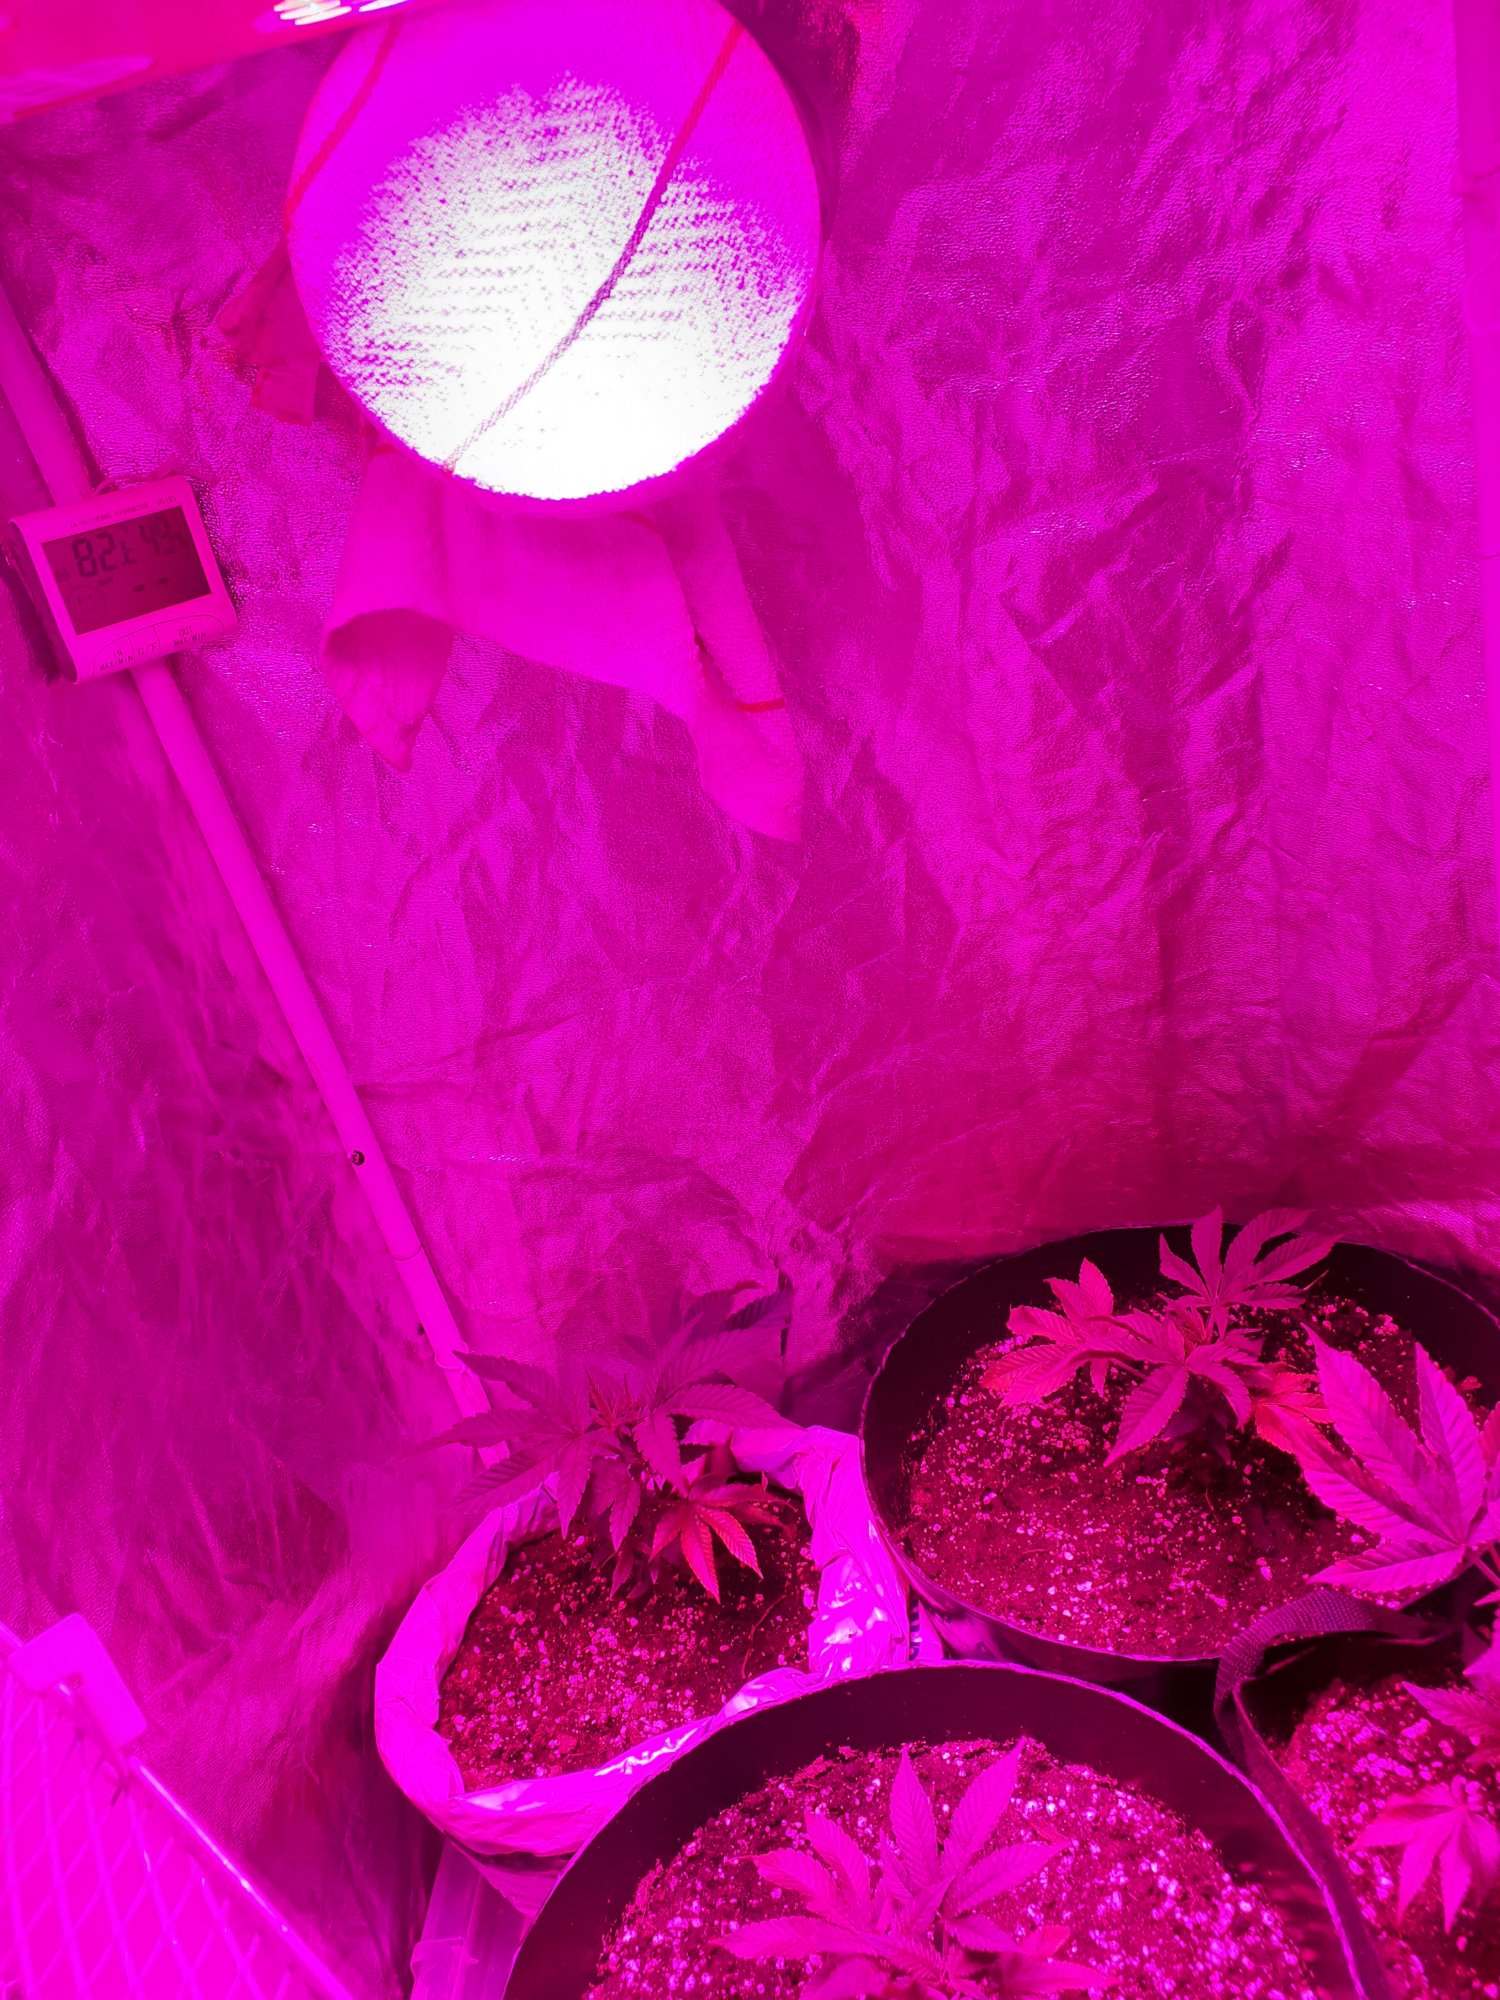 First time grower but unsure what lights i have